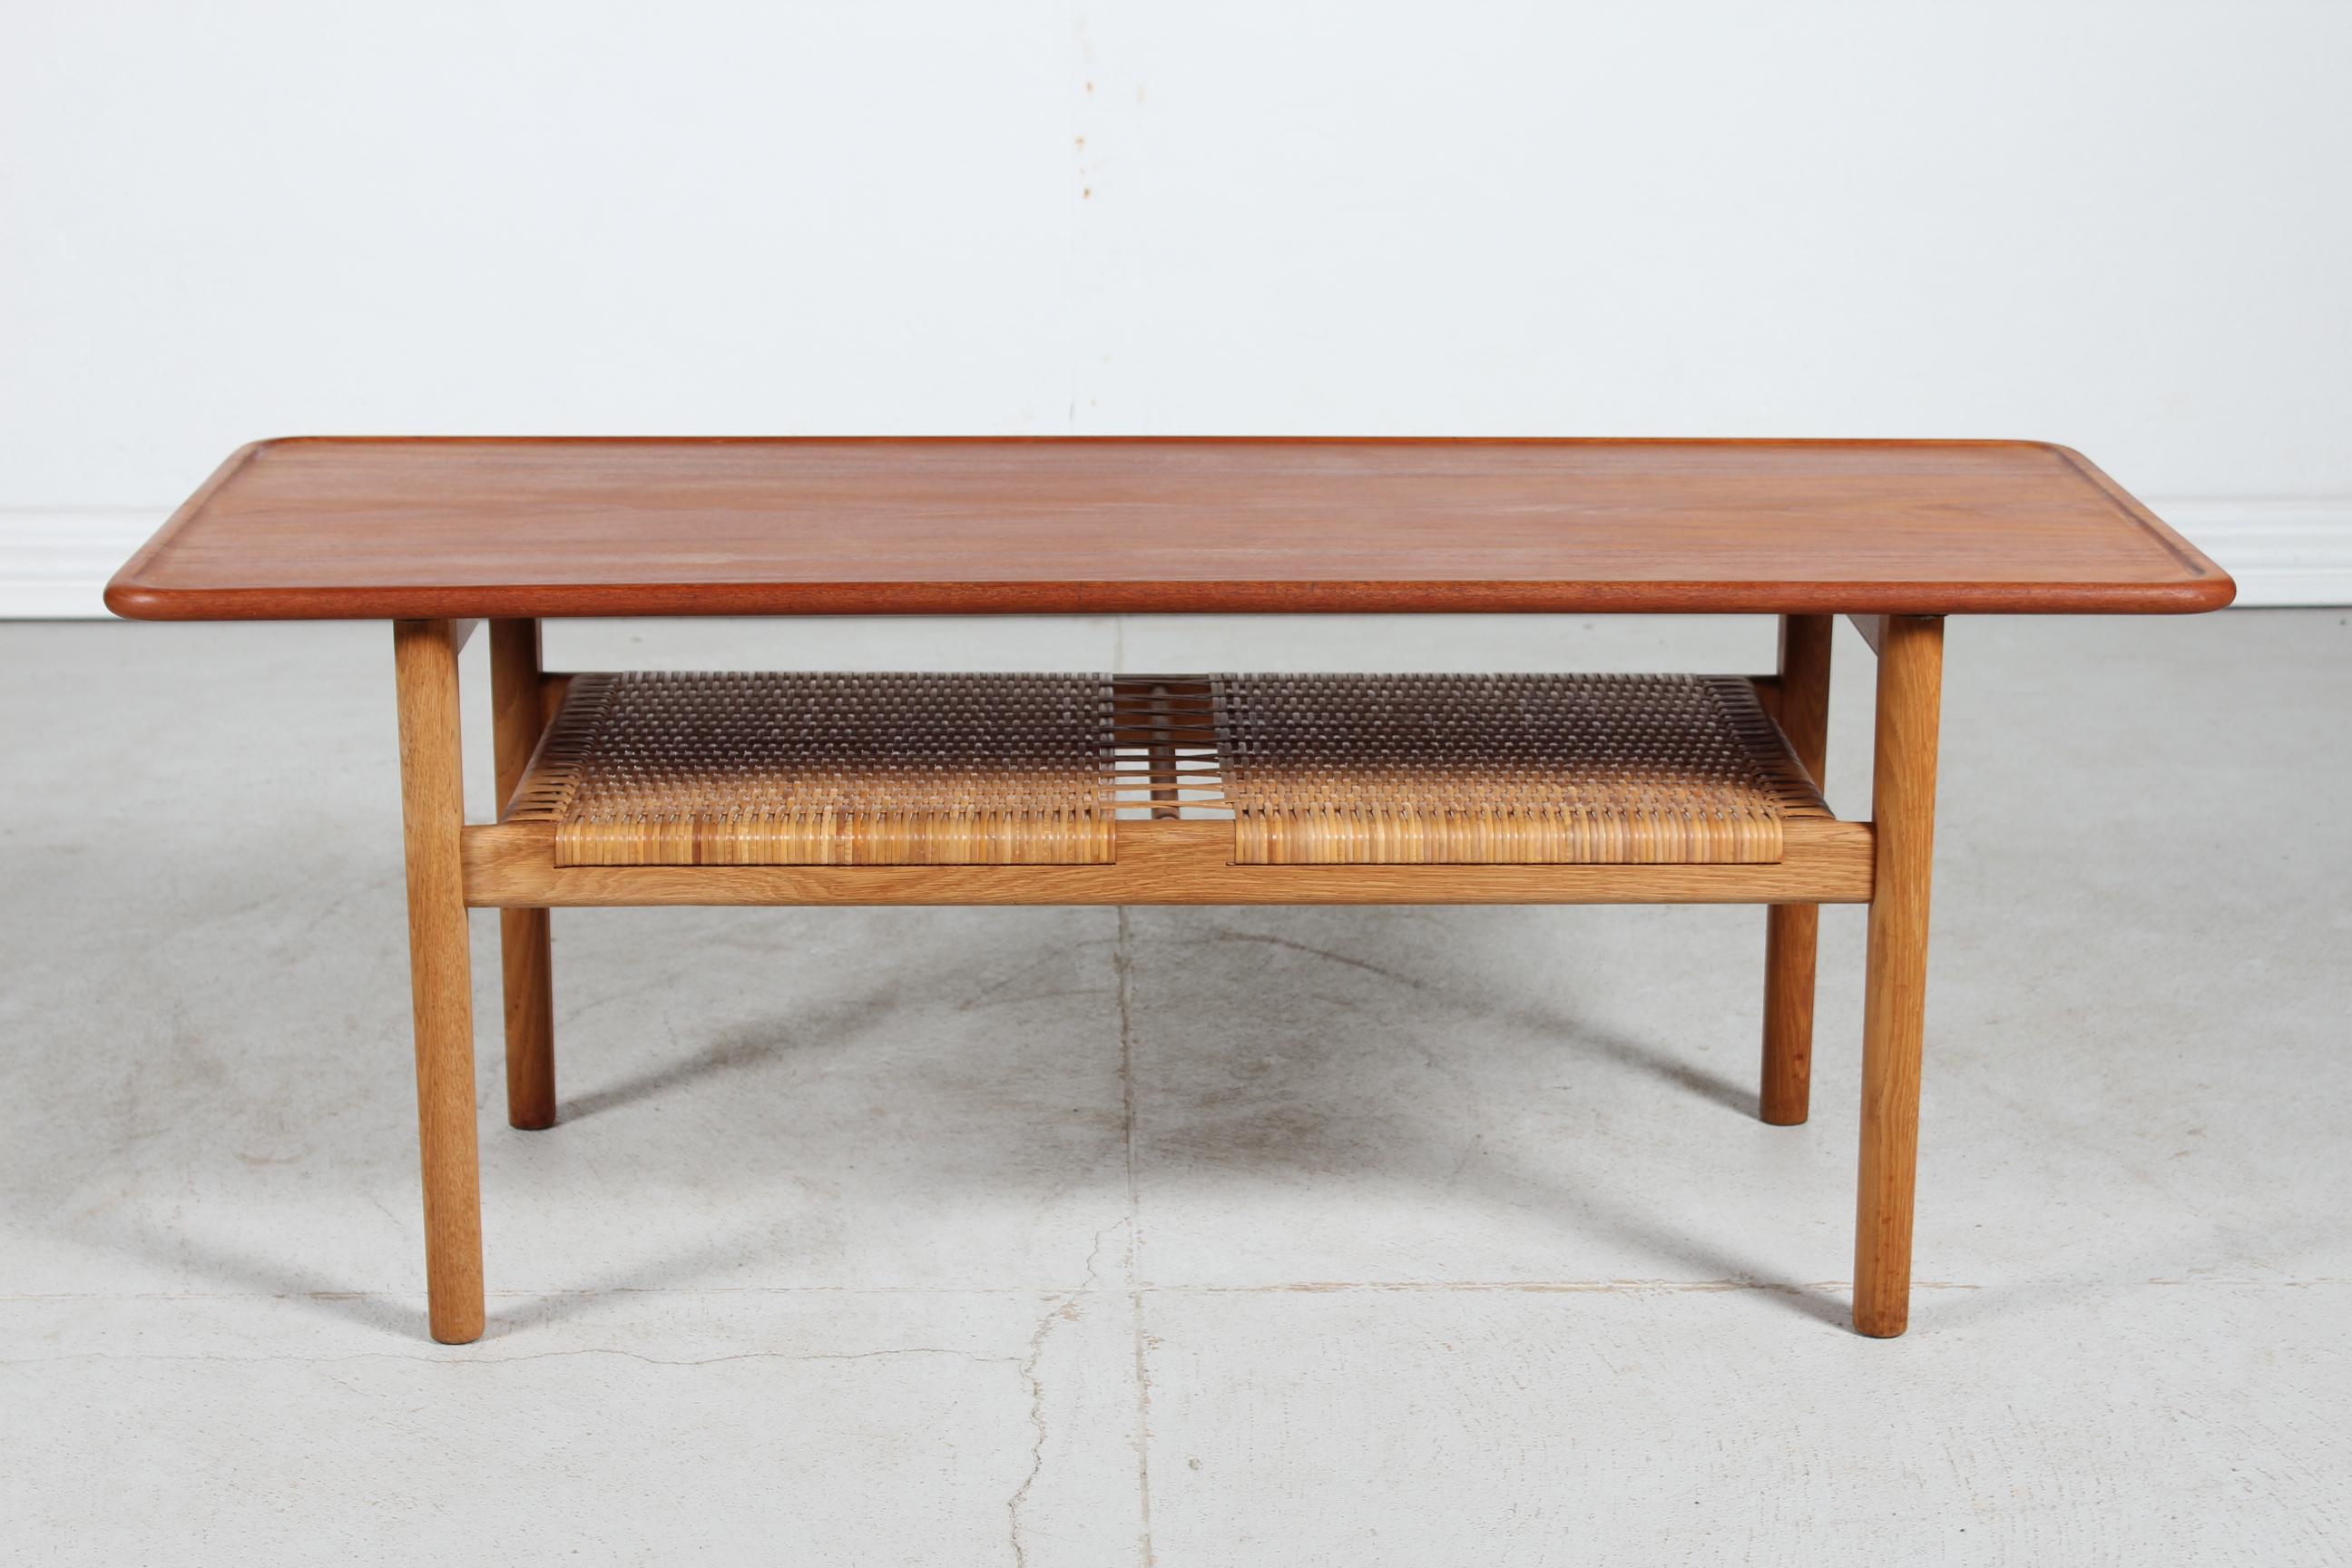 Vintage coffee table model AT 10 by Danish architect Hans J. Wegner (1914-2007) manufactured by Andreas Tuck in the 1950s.

The coffee table has a tabletop of solid teak with raised edge mounted on a frame of solid oak. 
Under the tabletop is a